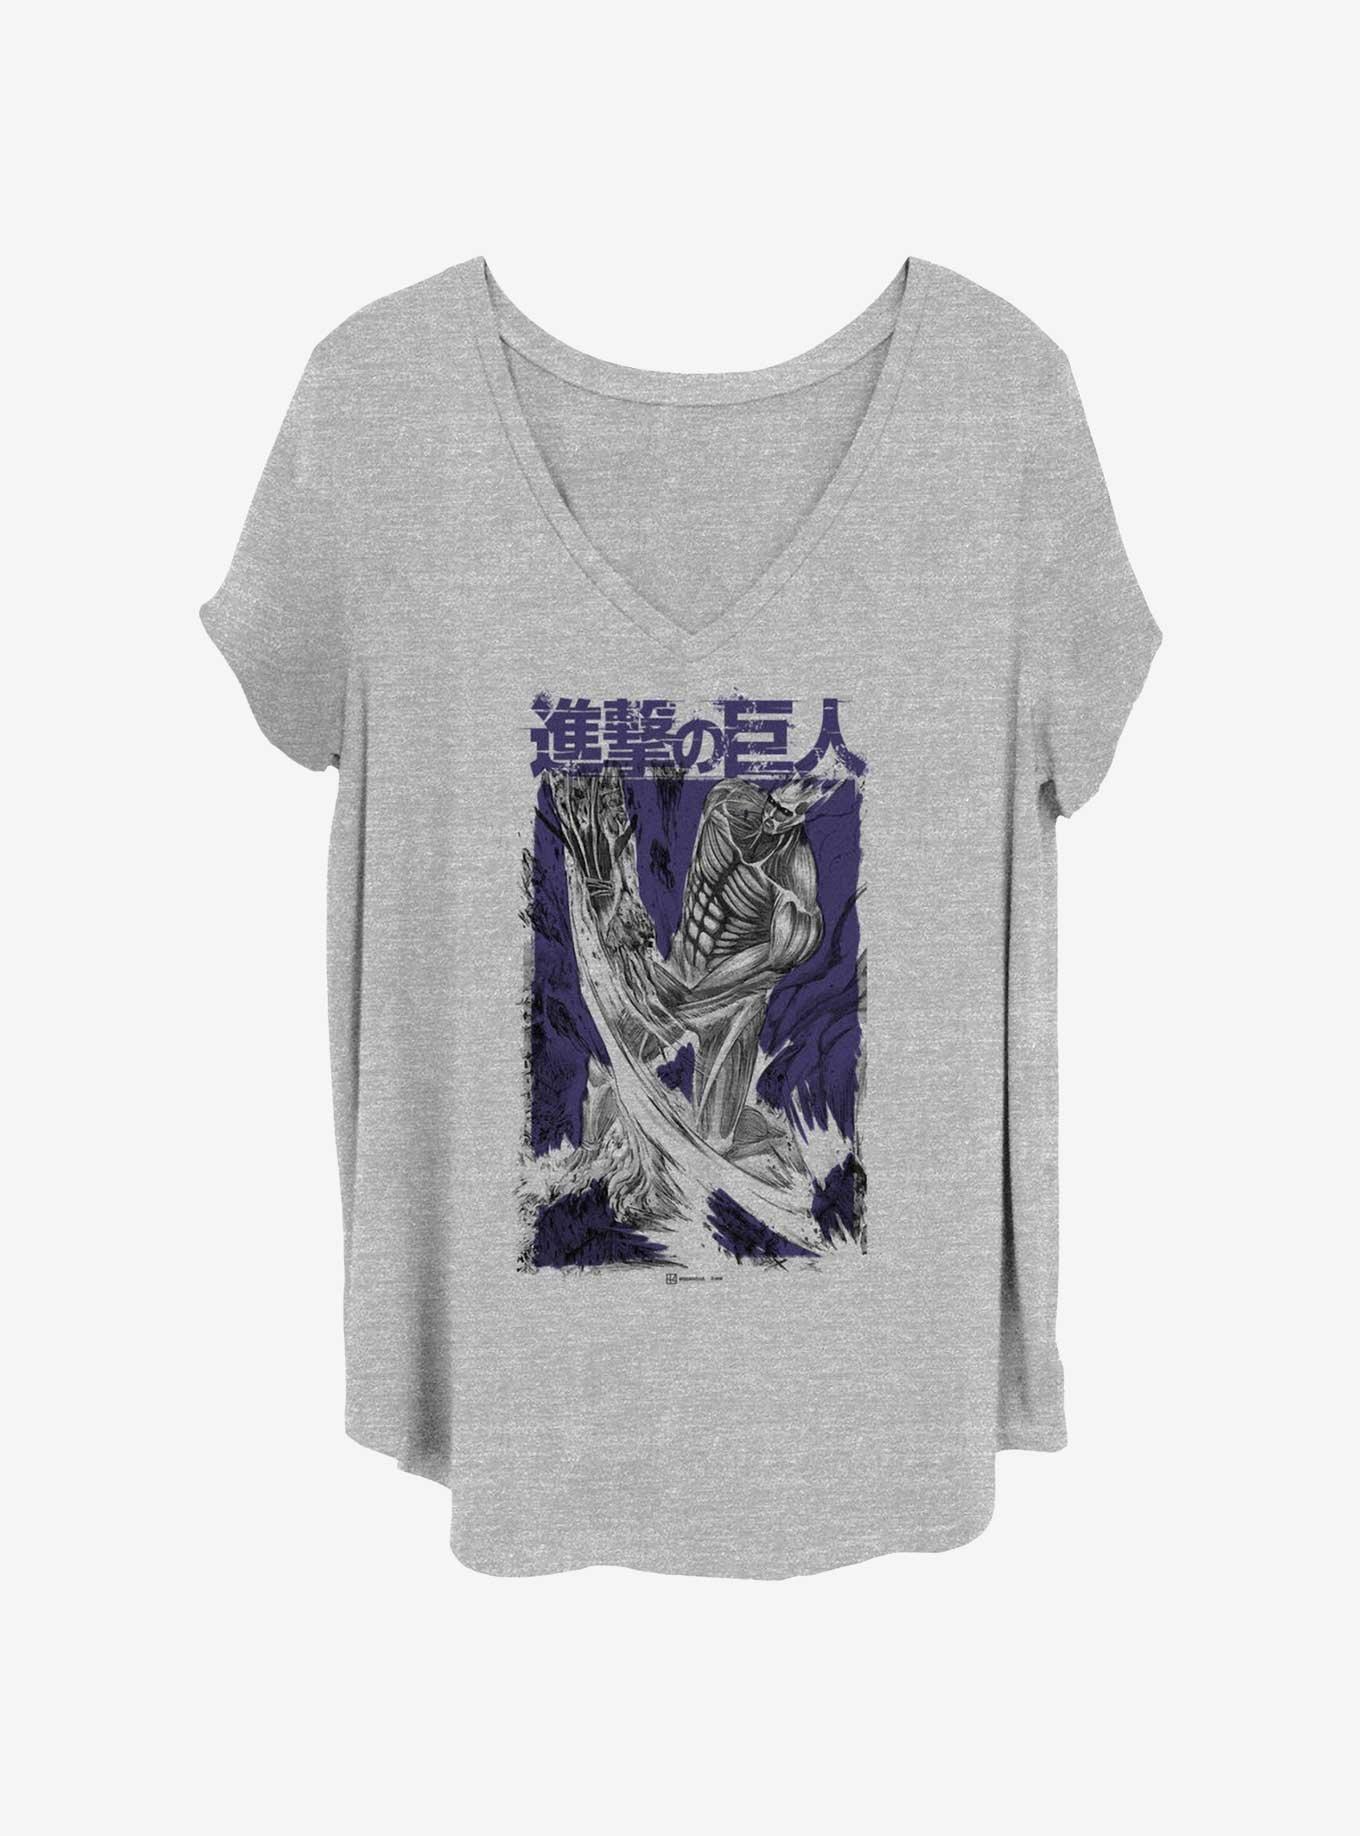 Attack on Titan Overlay Colossus Girls T-Shirt Plus Size, HEATHER GR, hi-res